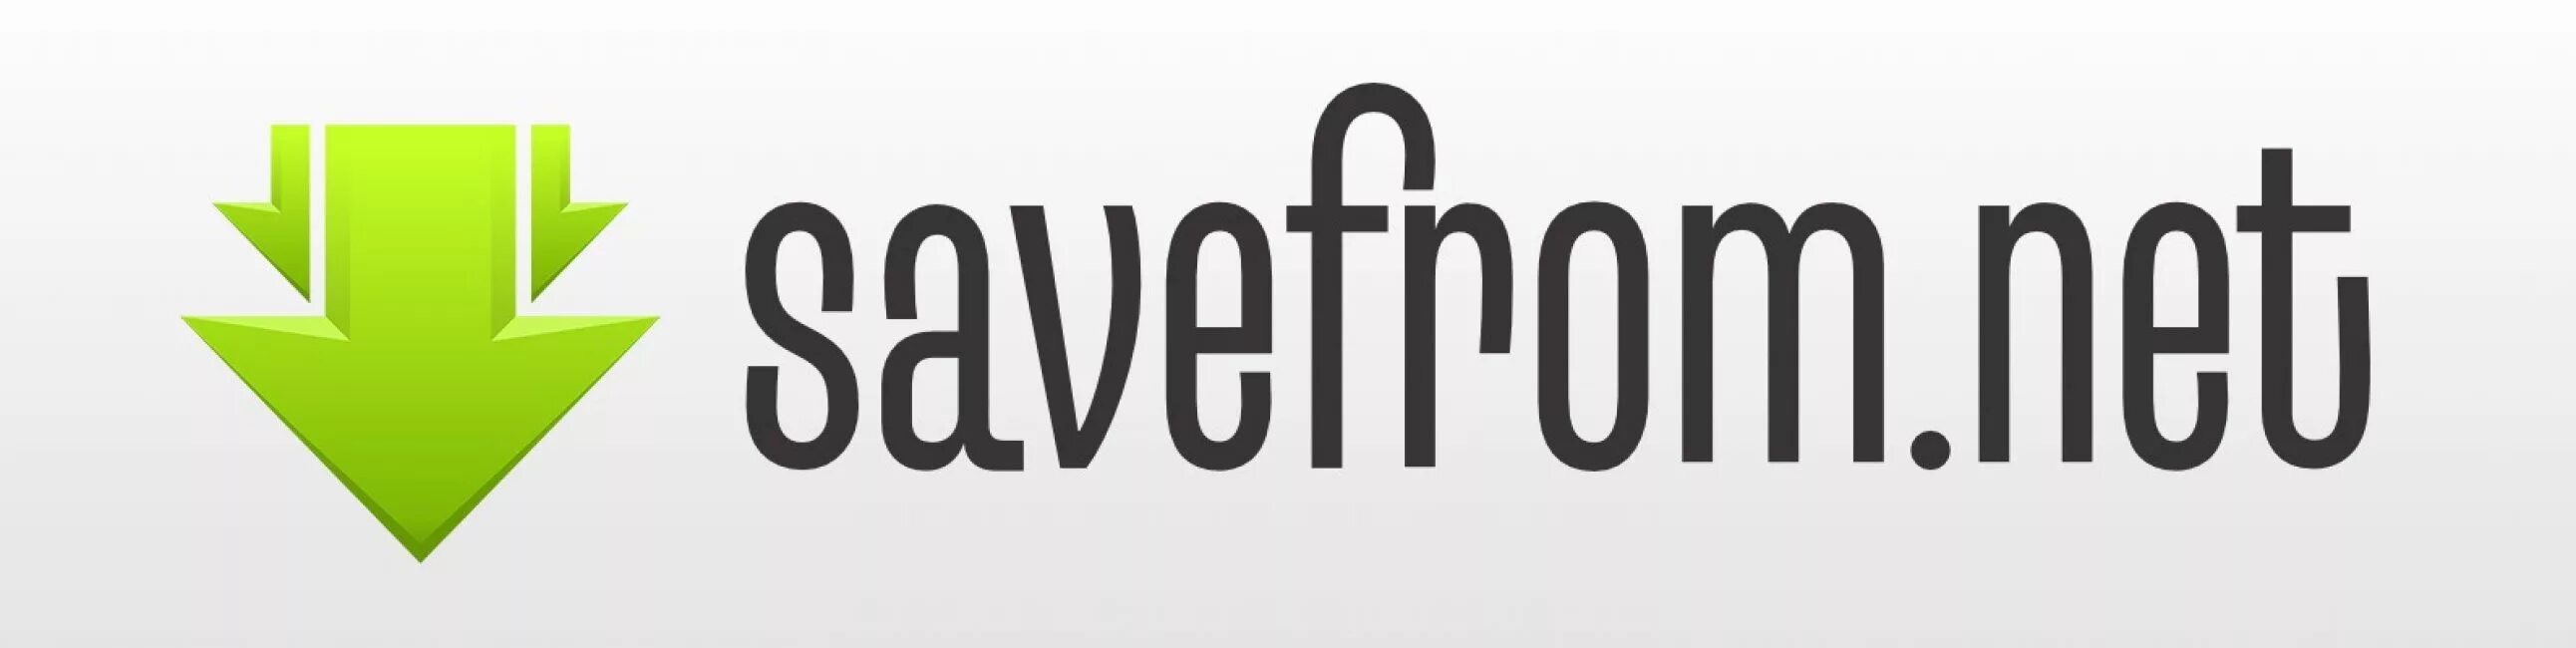 Safefromnet net. Savefrom. Savefrom.net иконка. Savefrom логотип. Safe from.